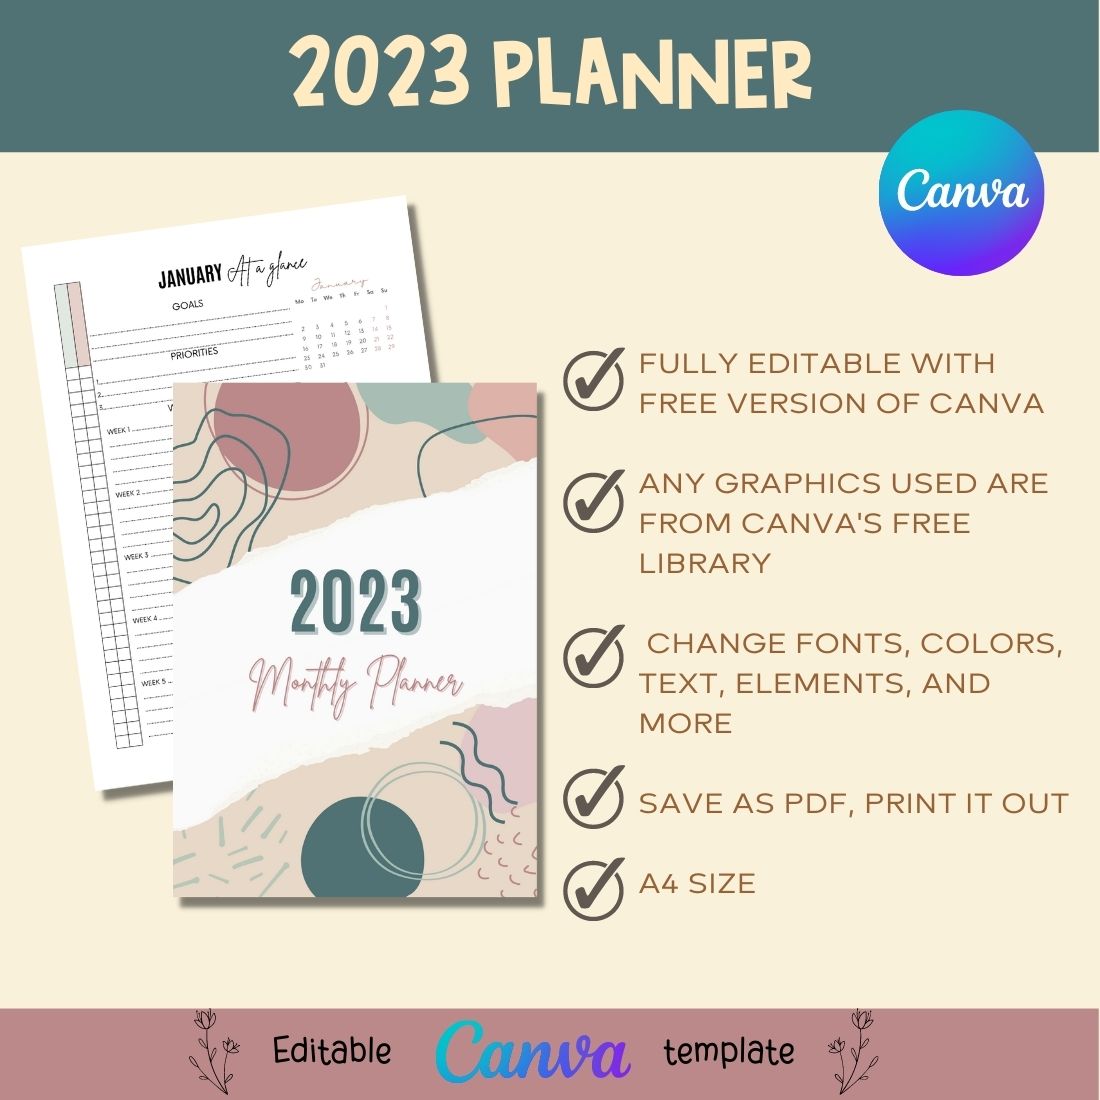 Minimal Planner Canva Templates preview image.